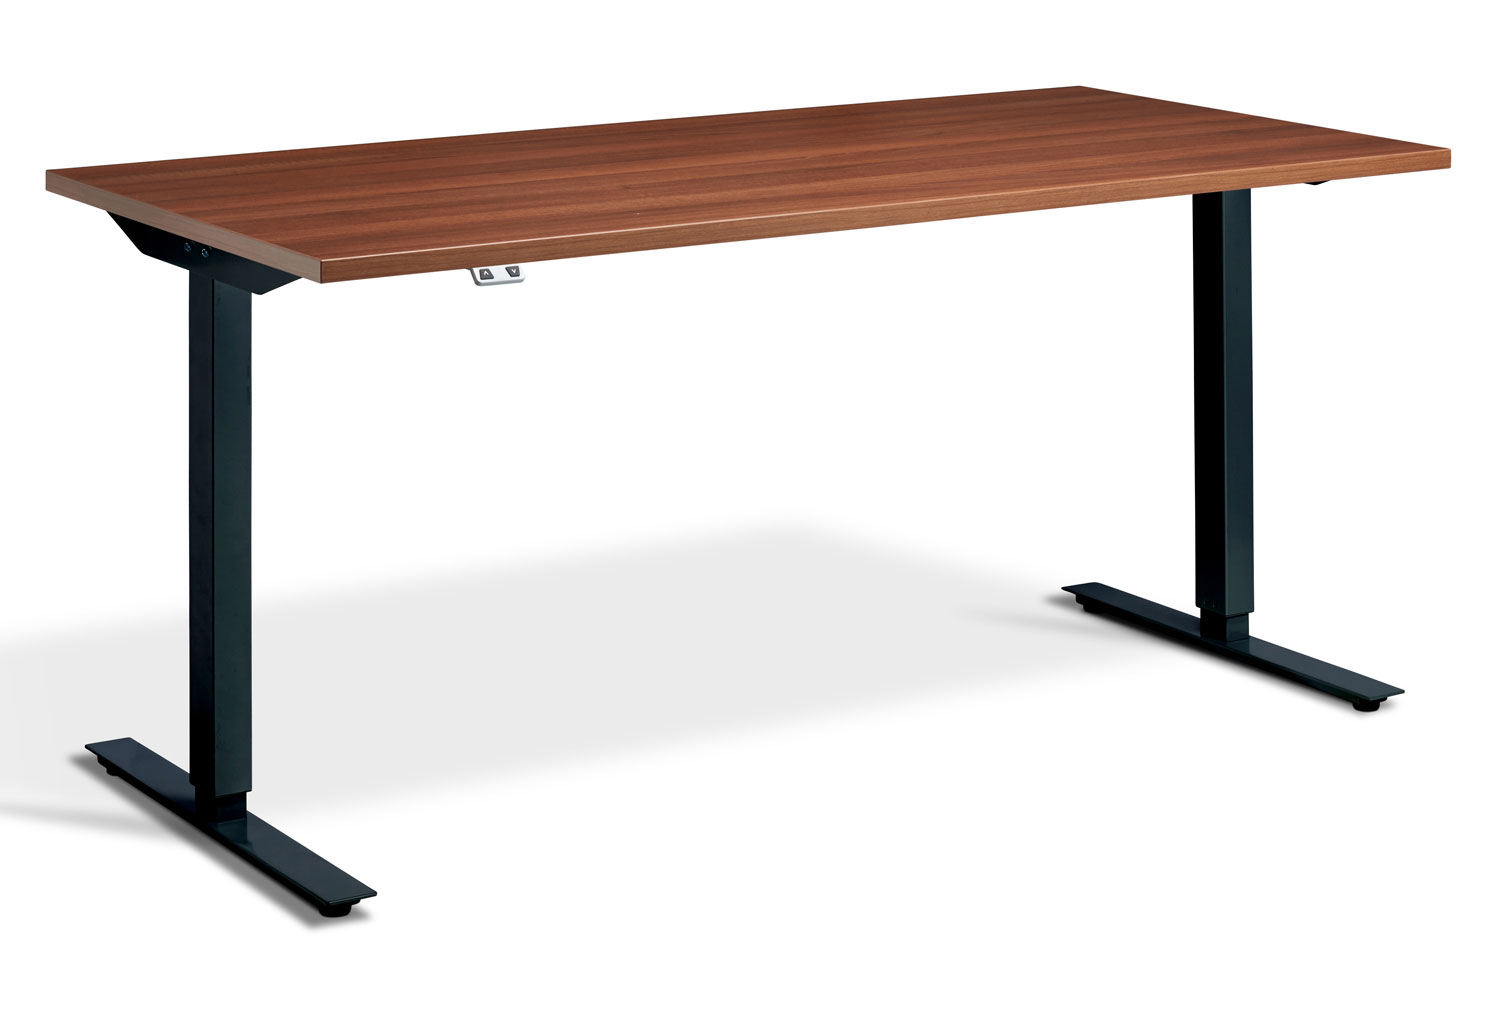 Calgary Dual Motor Height Adjustable Office Desk, 160wx70dx70-120h (cm), Black Frame, Walnut, Express Delivery